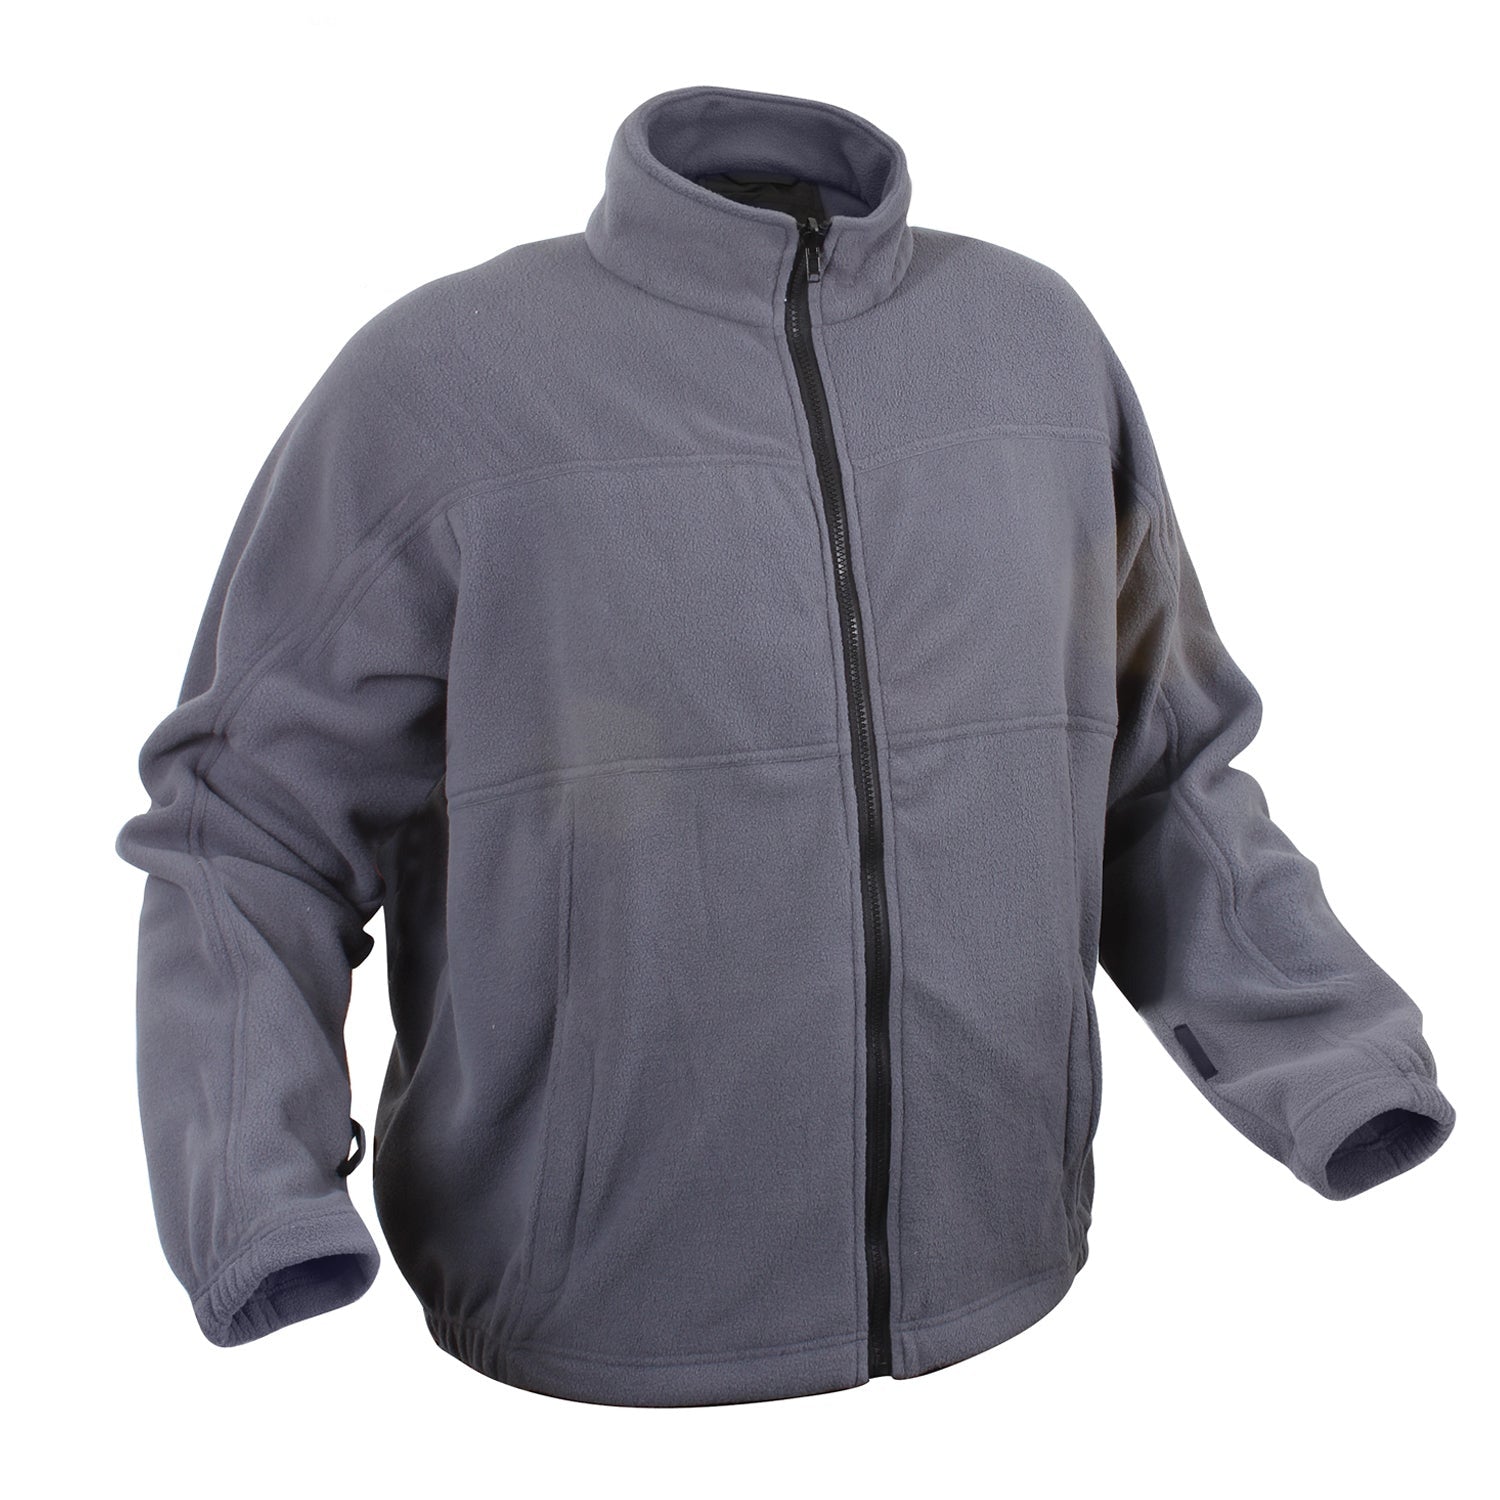 The complete all-weather jacket, Rothco’s 3-in-1 Jacket provides you with unparalleled warmth and protection against the elements with a waterproof, breathable outer shell and removable fleece liner. 